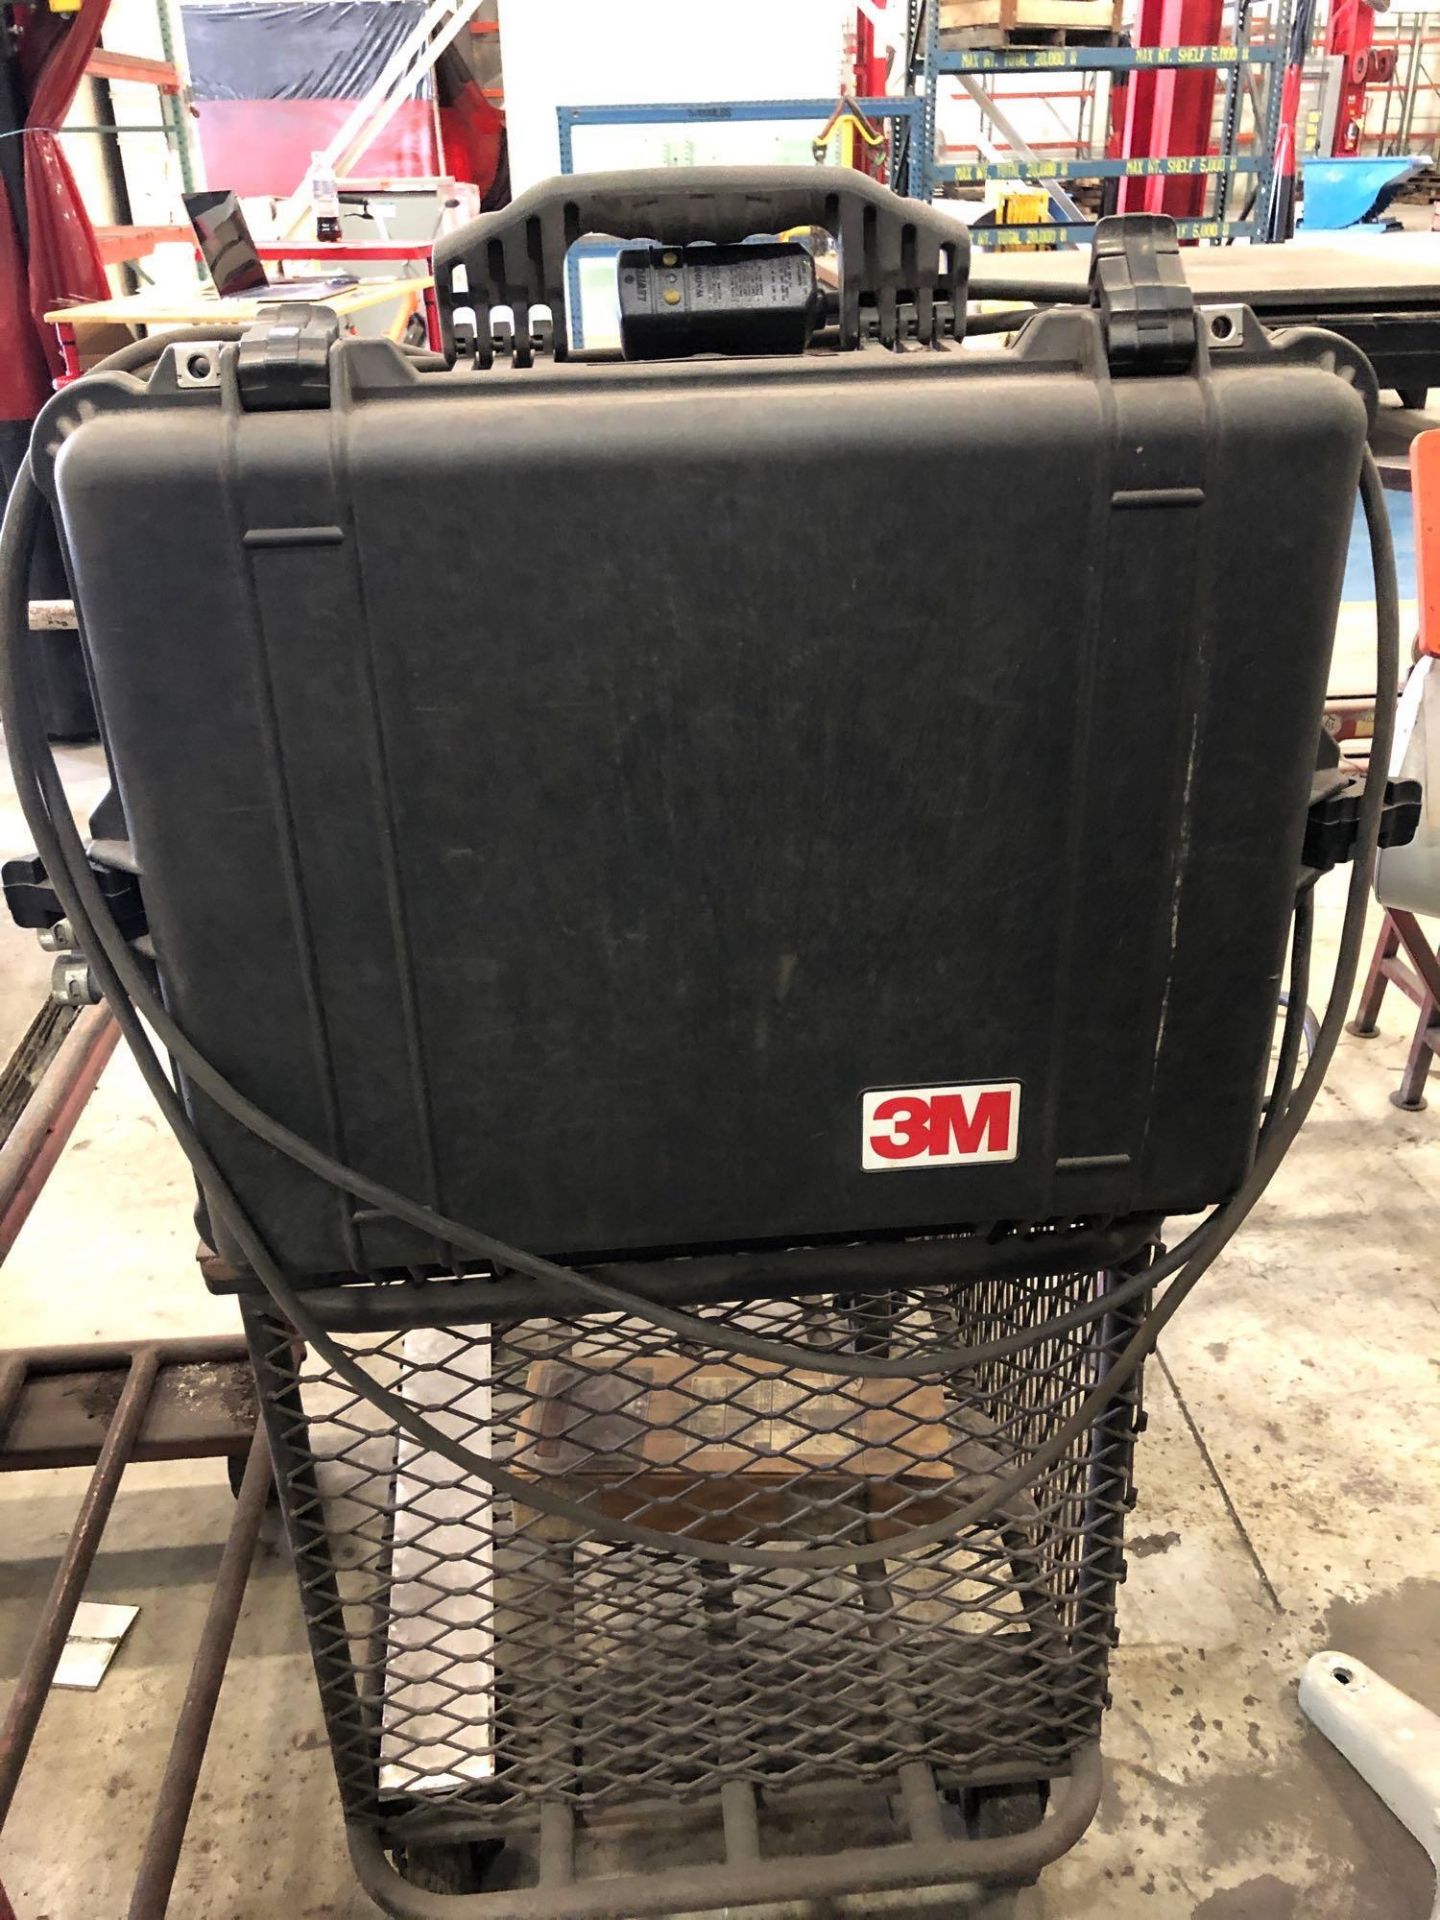 Steel Roll Around Cart w/ 3M Model: 5700 Co Monitor Air Purification System - Image 6 of 28